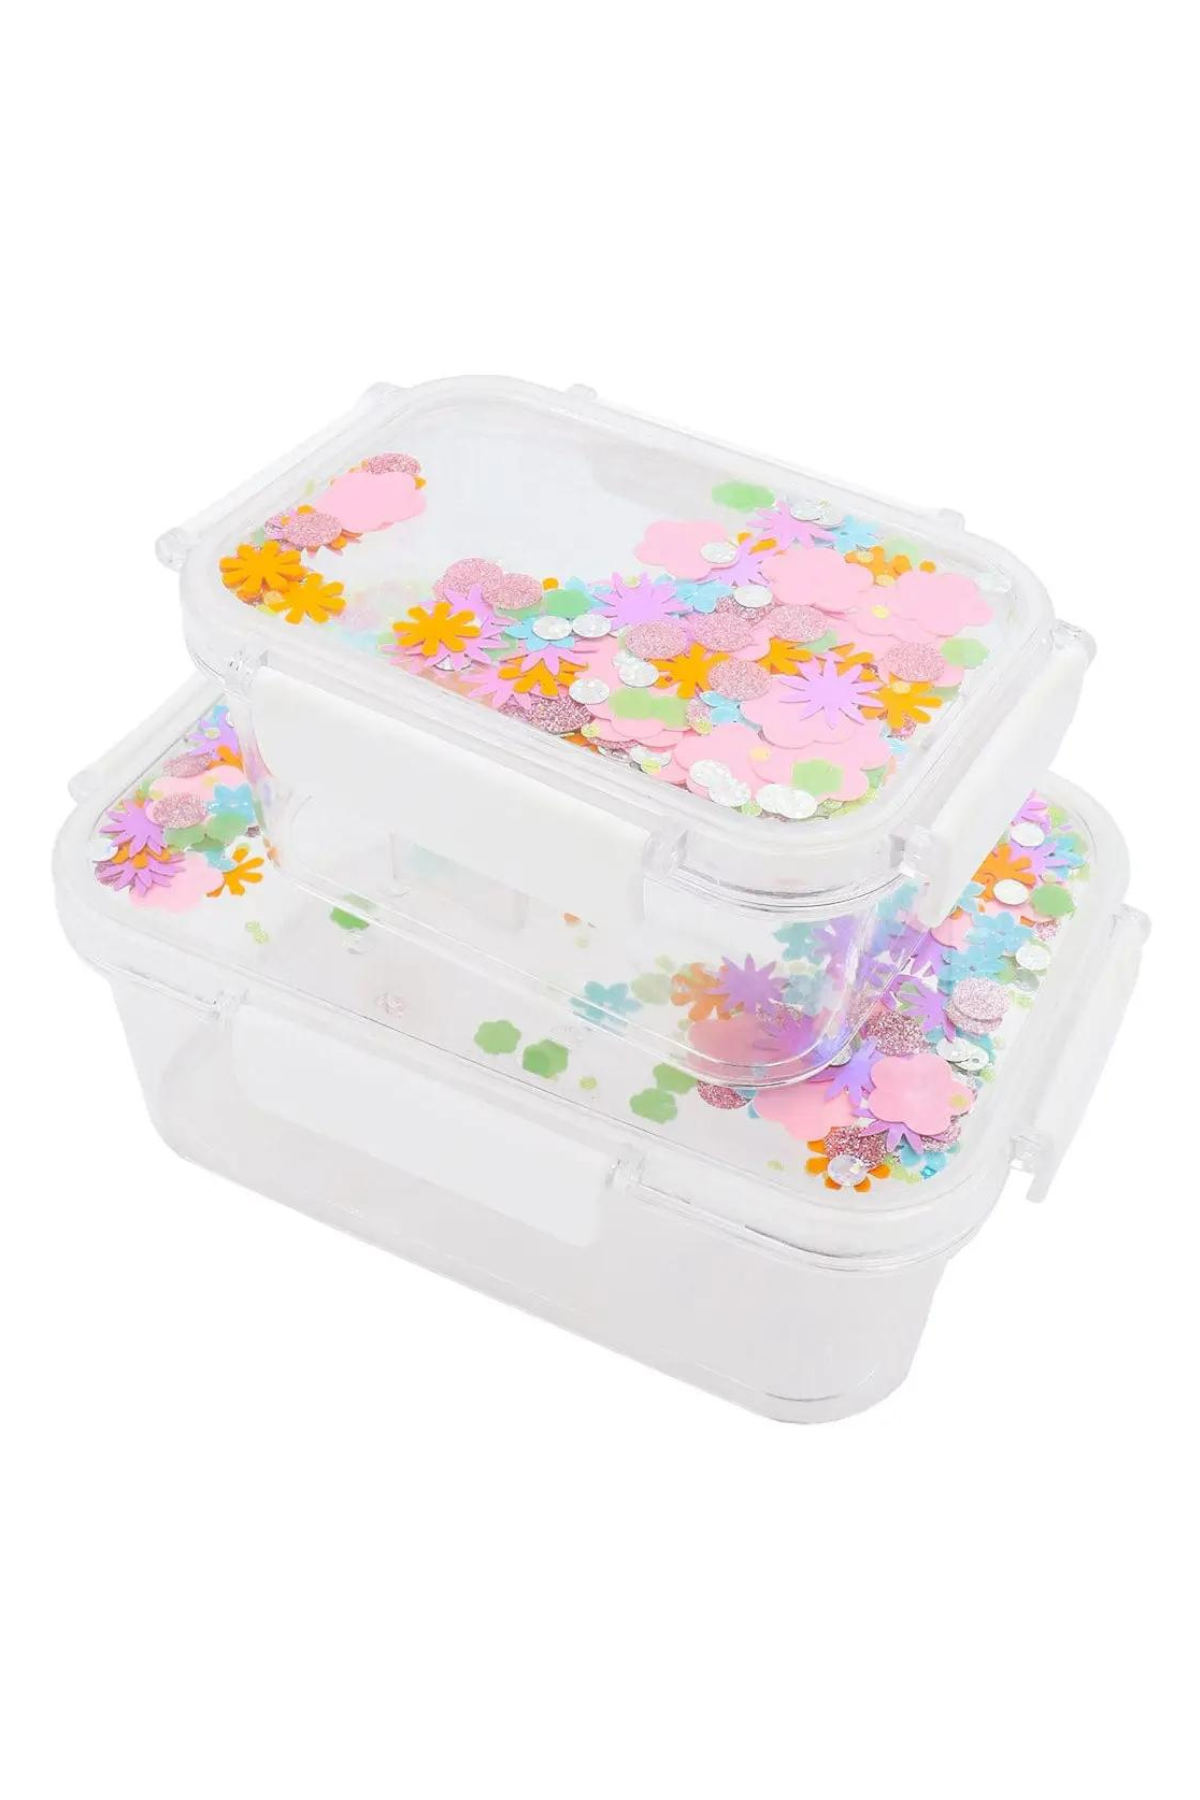 Confetti For Lunch Storage Set of 2